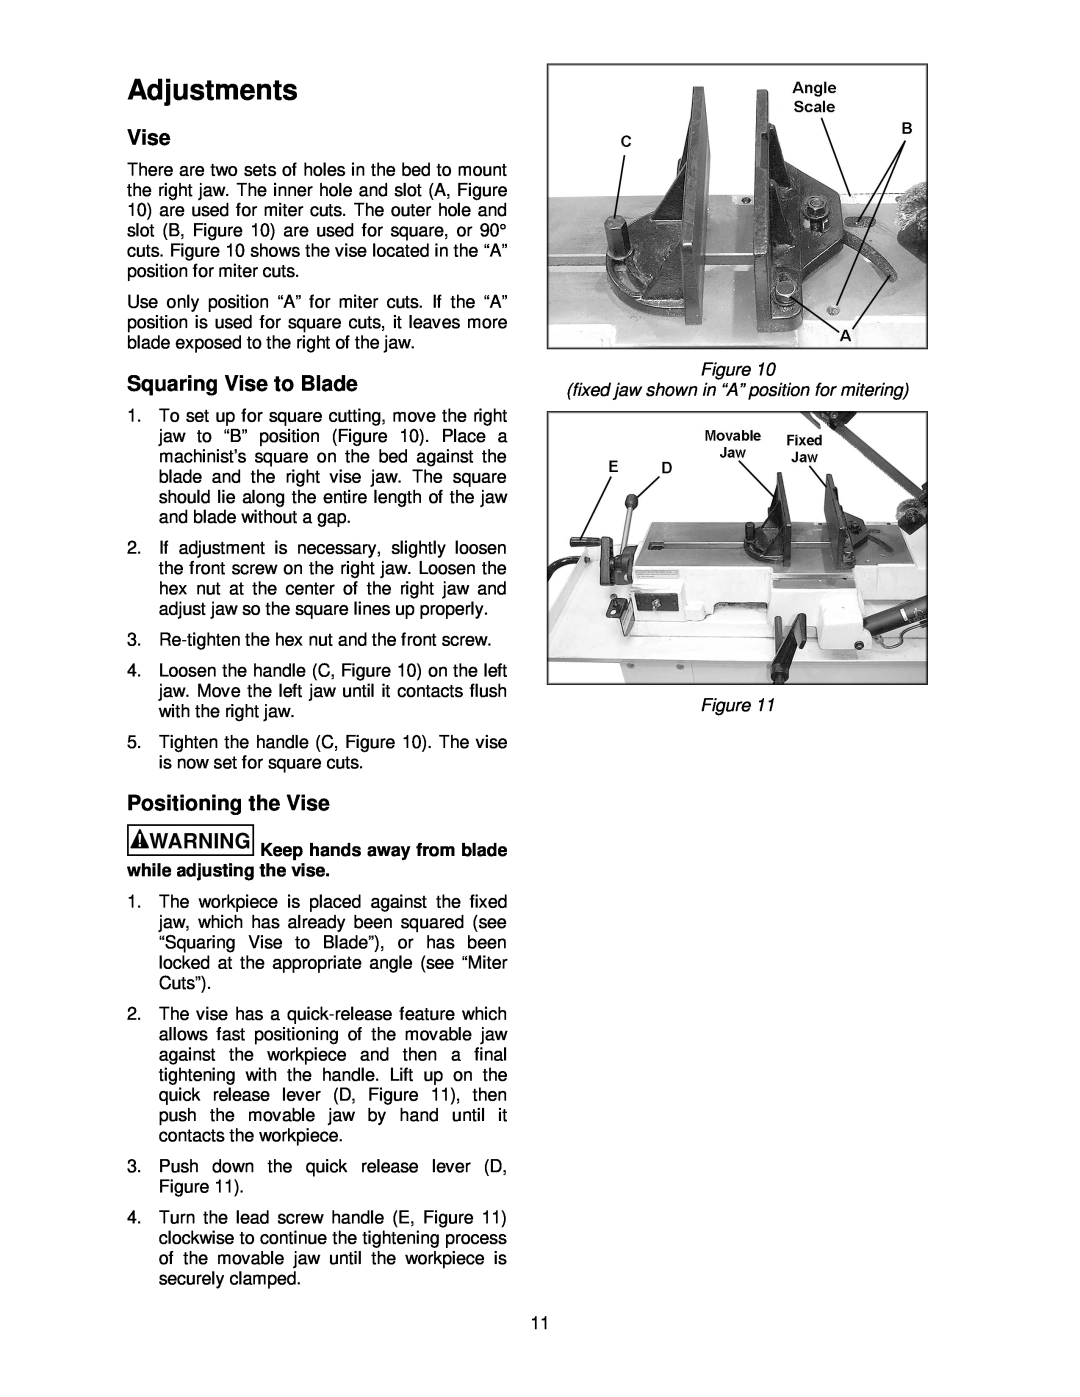 Jet Tools HBS-814GH operating instructions Adjustments, Squaring Vise to Blade, Positioning the Vise 